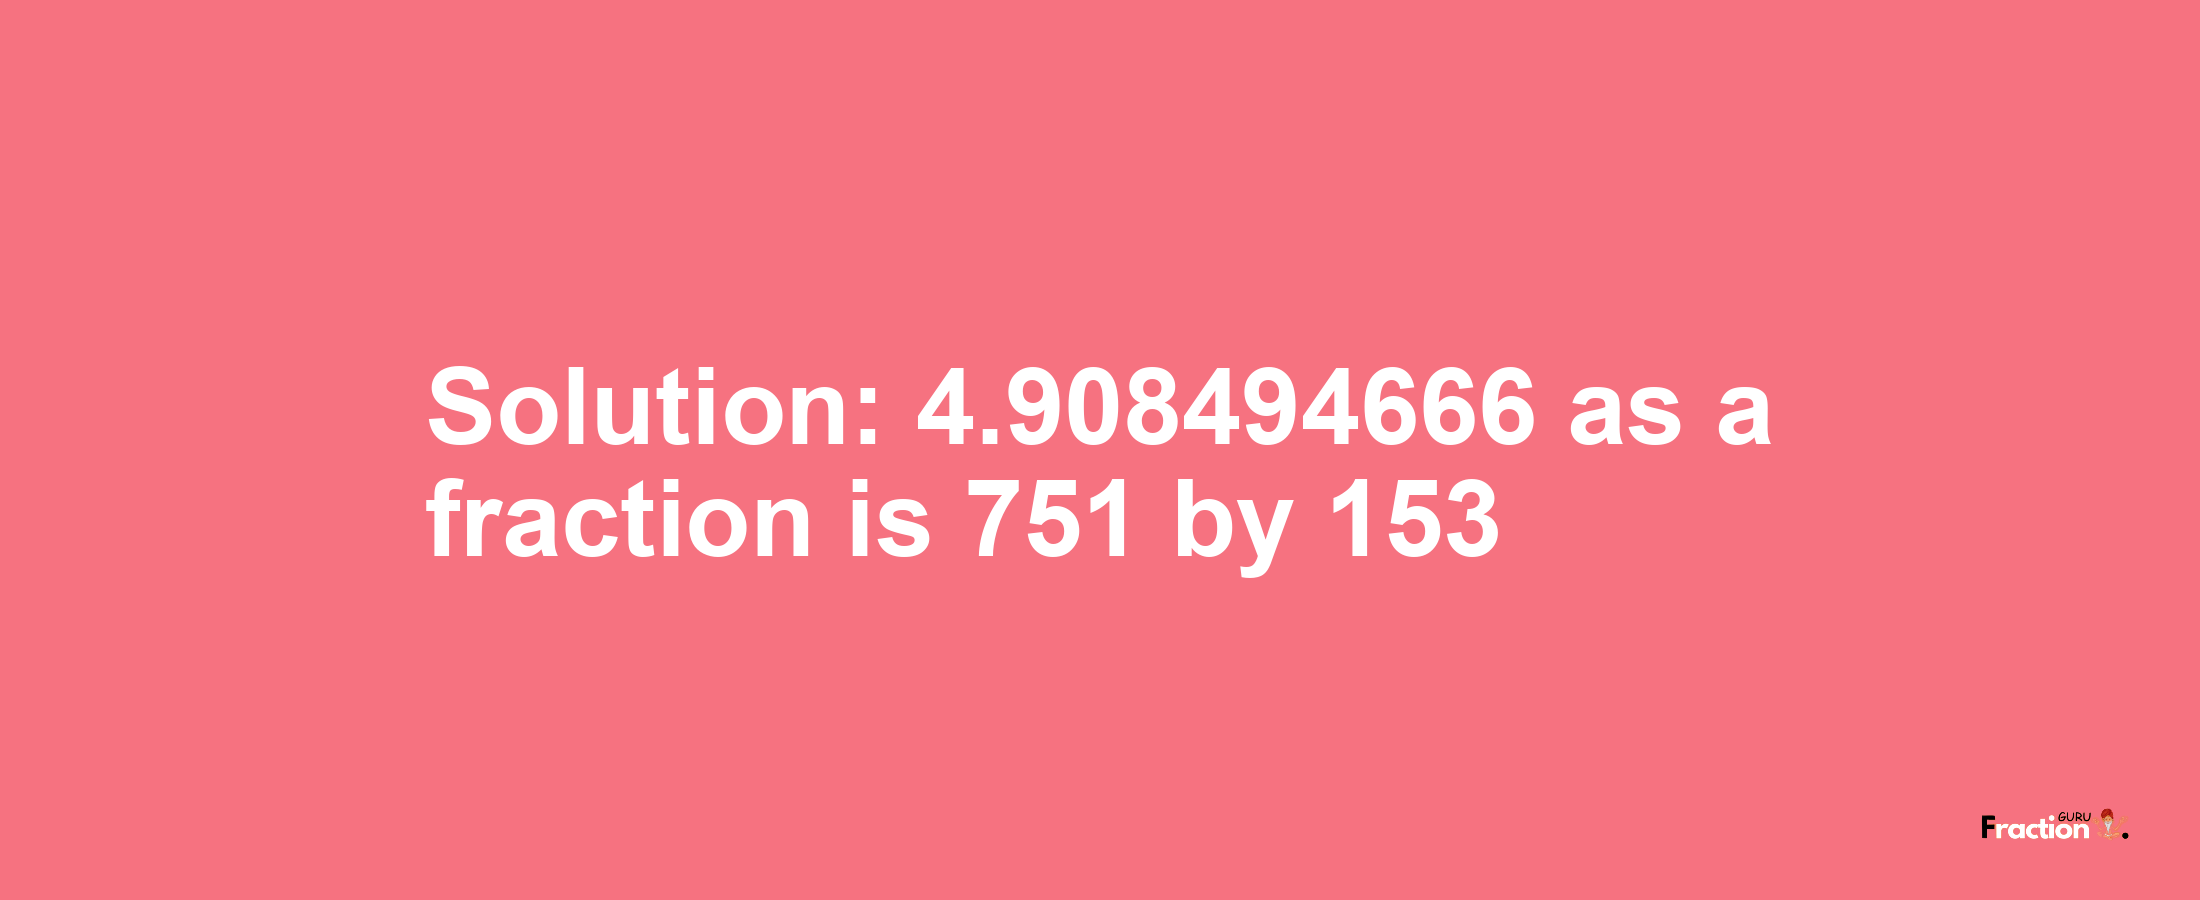 Solution:4.908494666 as a fraction is 751/153